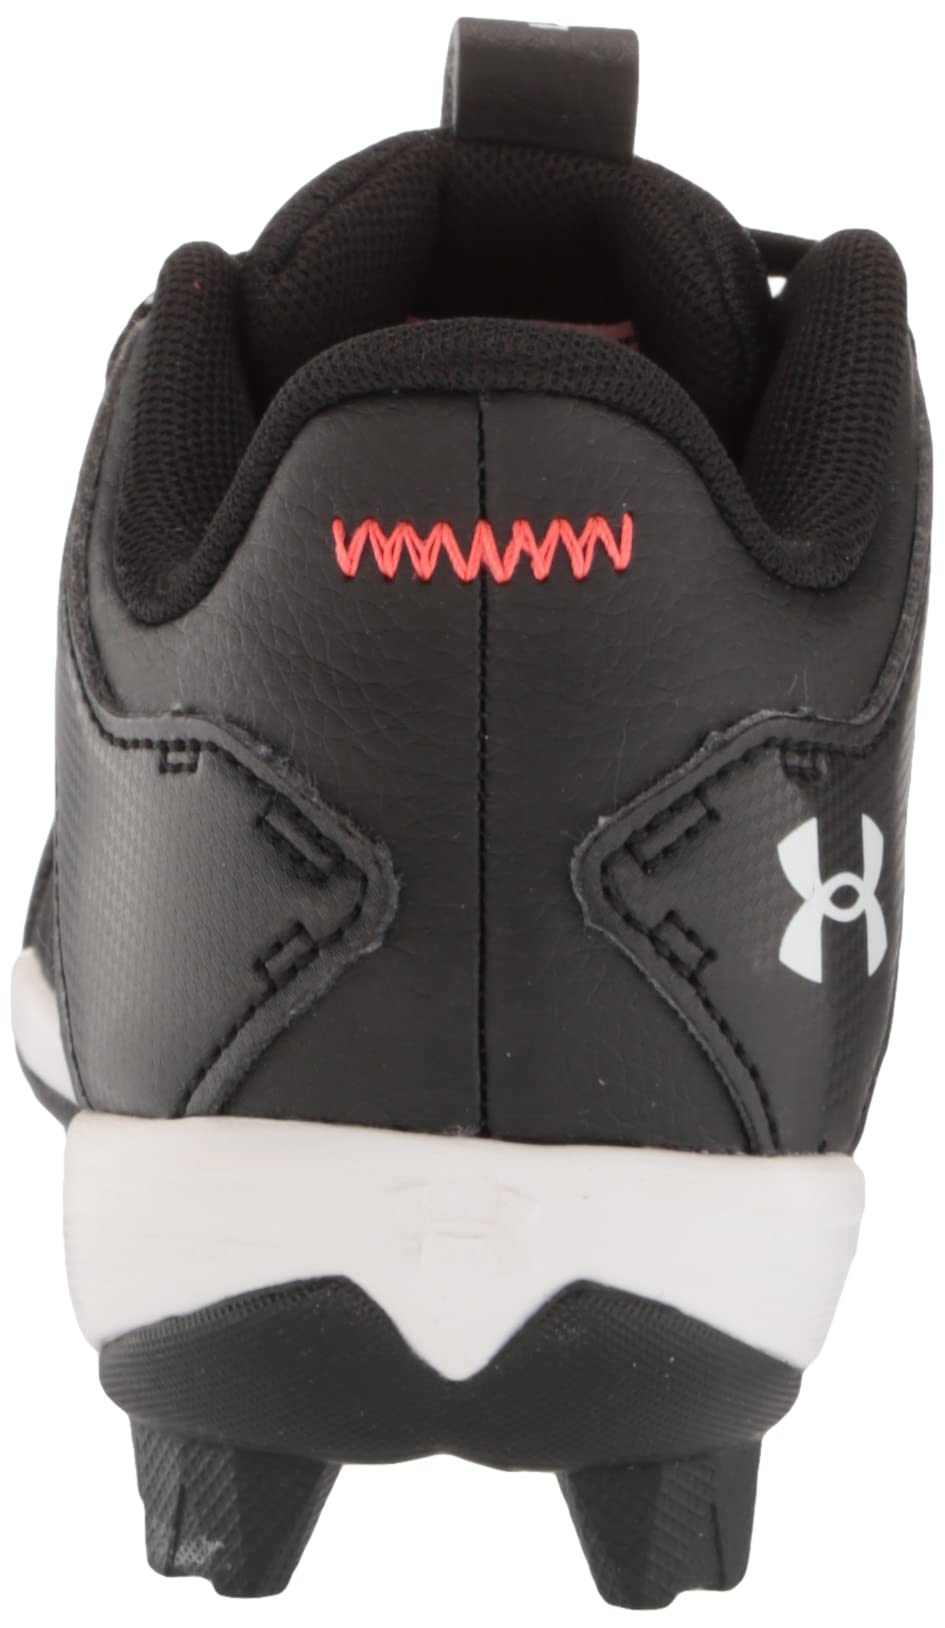 Under Armour Unisex-Child Leadoff Low Junior Rubber Molded Baseball Cleat Shoe